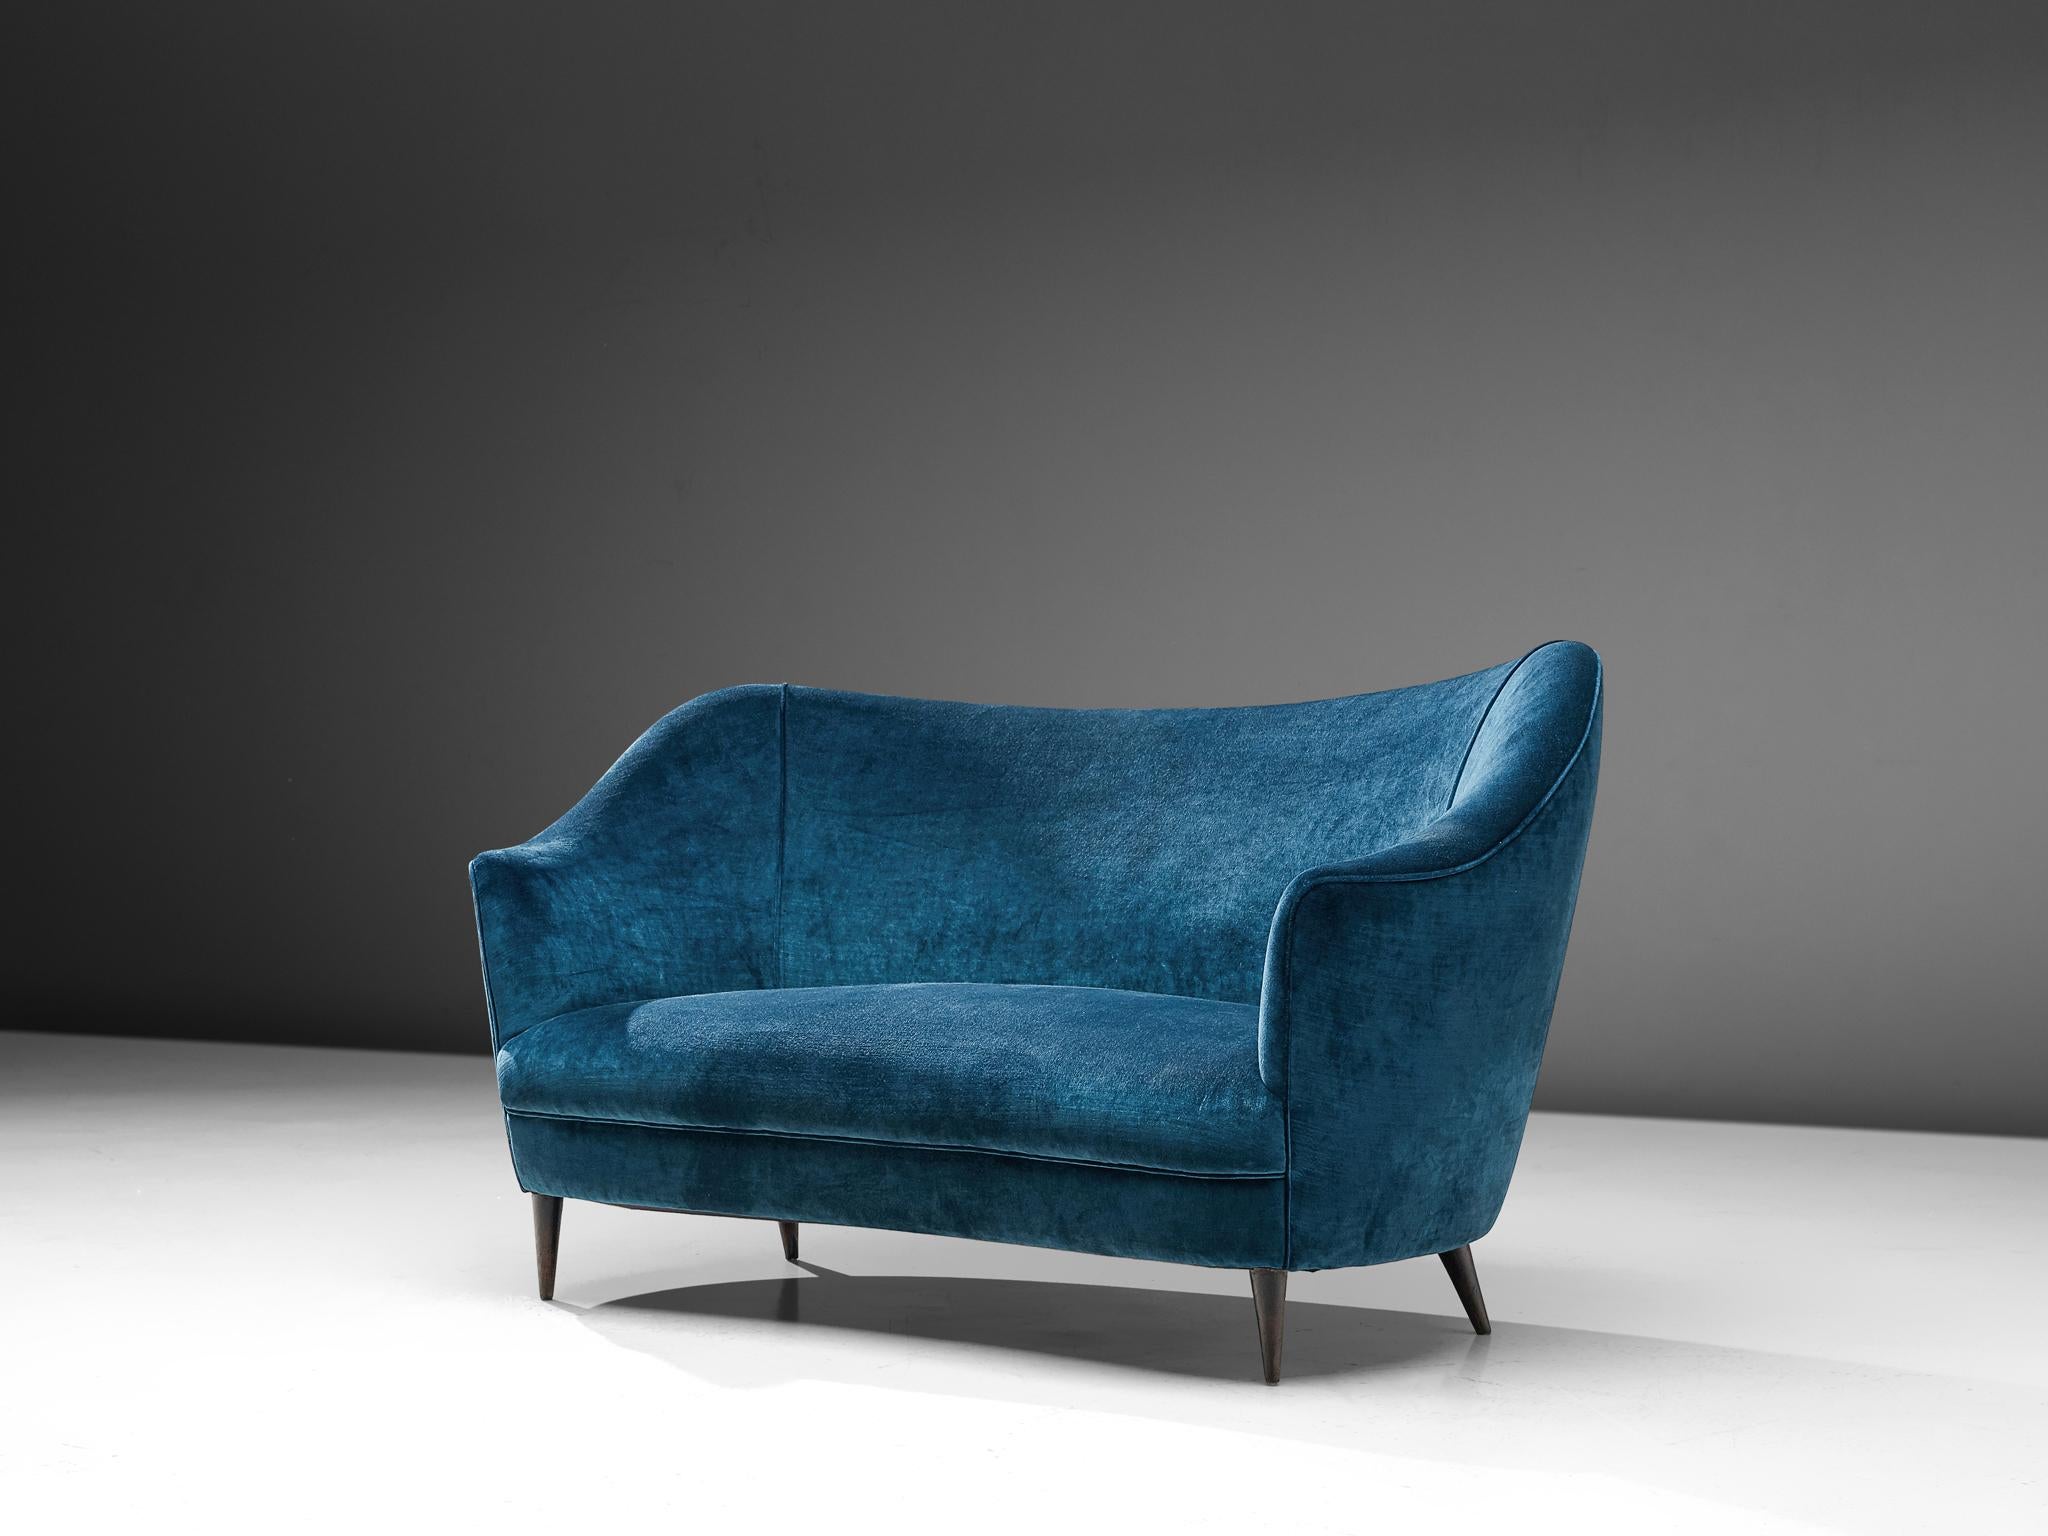 Sofa, wood and blue fabric, Italy, 1950s.

Two-seat Italian sofa in blue velvet upholstery. This sofa shows beautiful and elegant lines. The wide seating is executed with high armrests pointed up that give this settee an airy, frivolous look. The